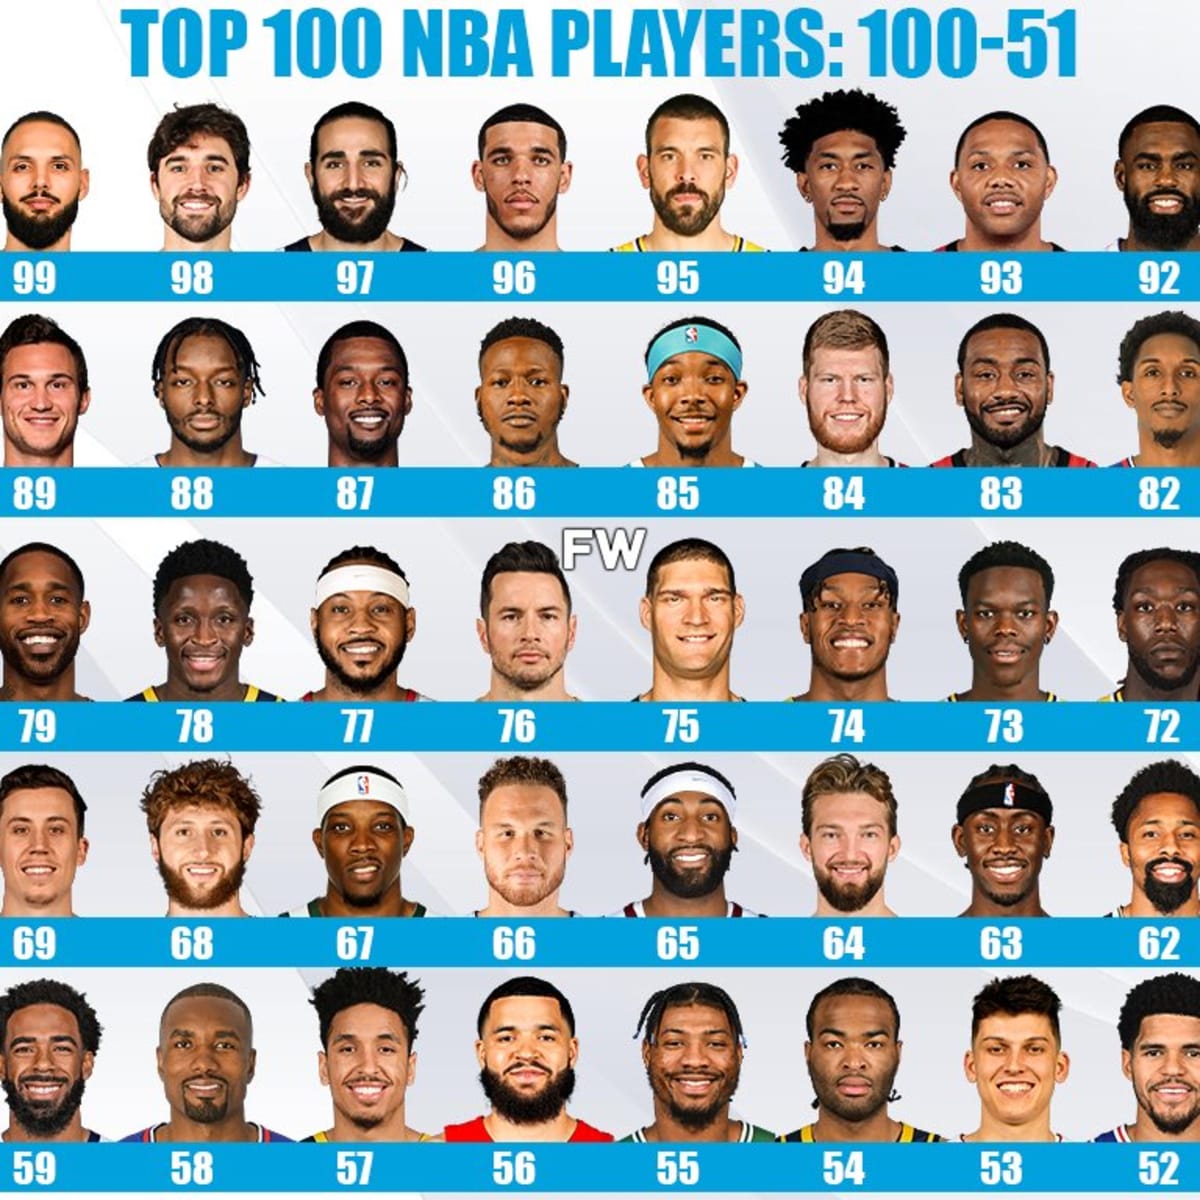 Here's ESPN's List of the 100 Best NBA Players of 2020 #NBArank